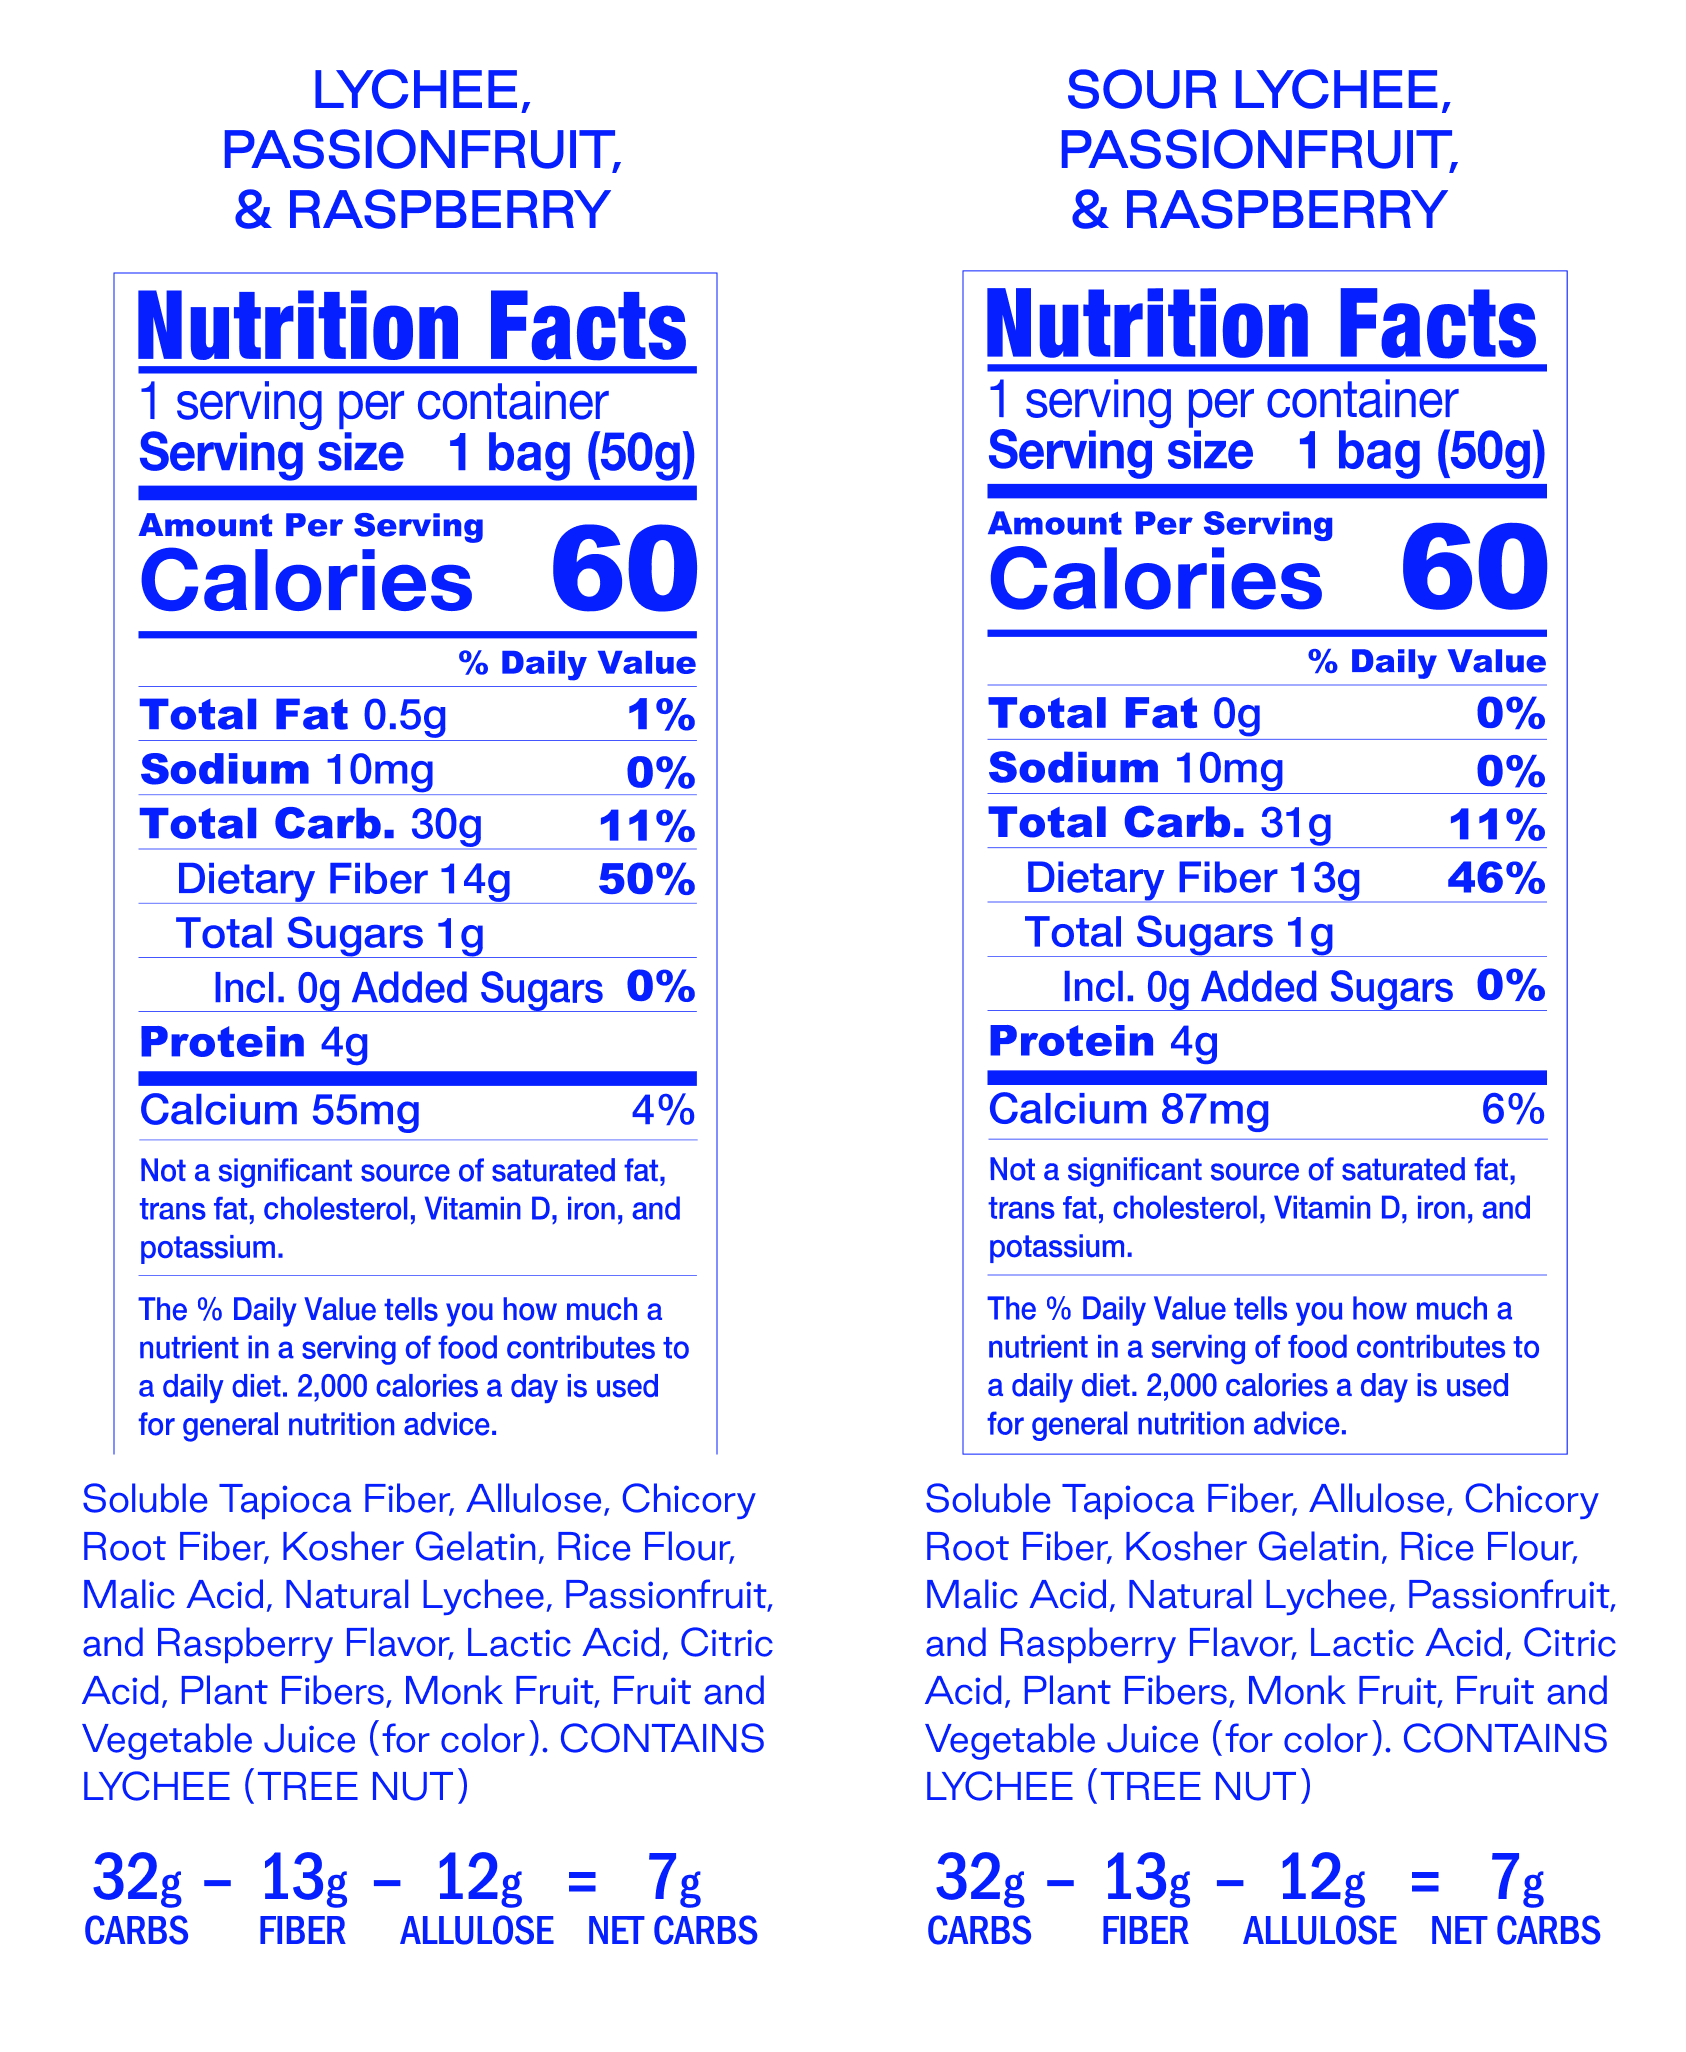 Sweet & Sour / 12 bags nutritional panel